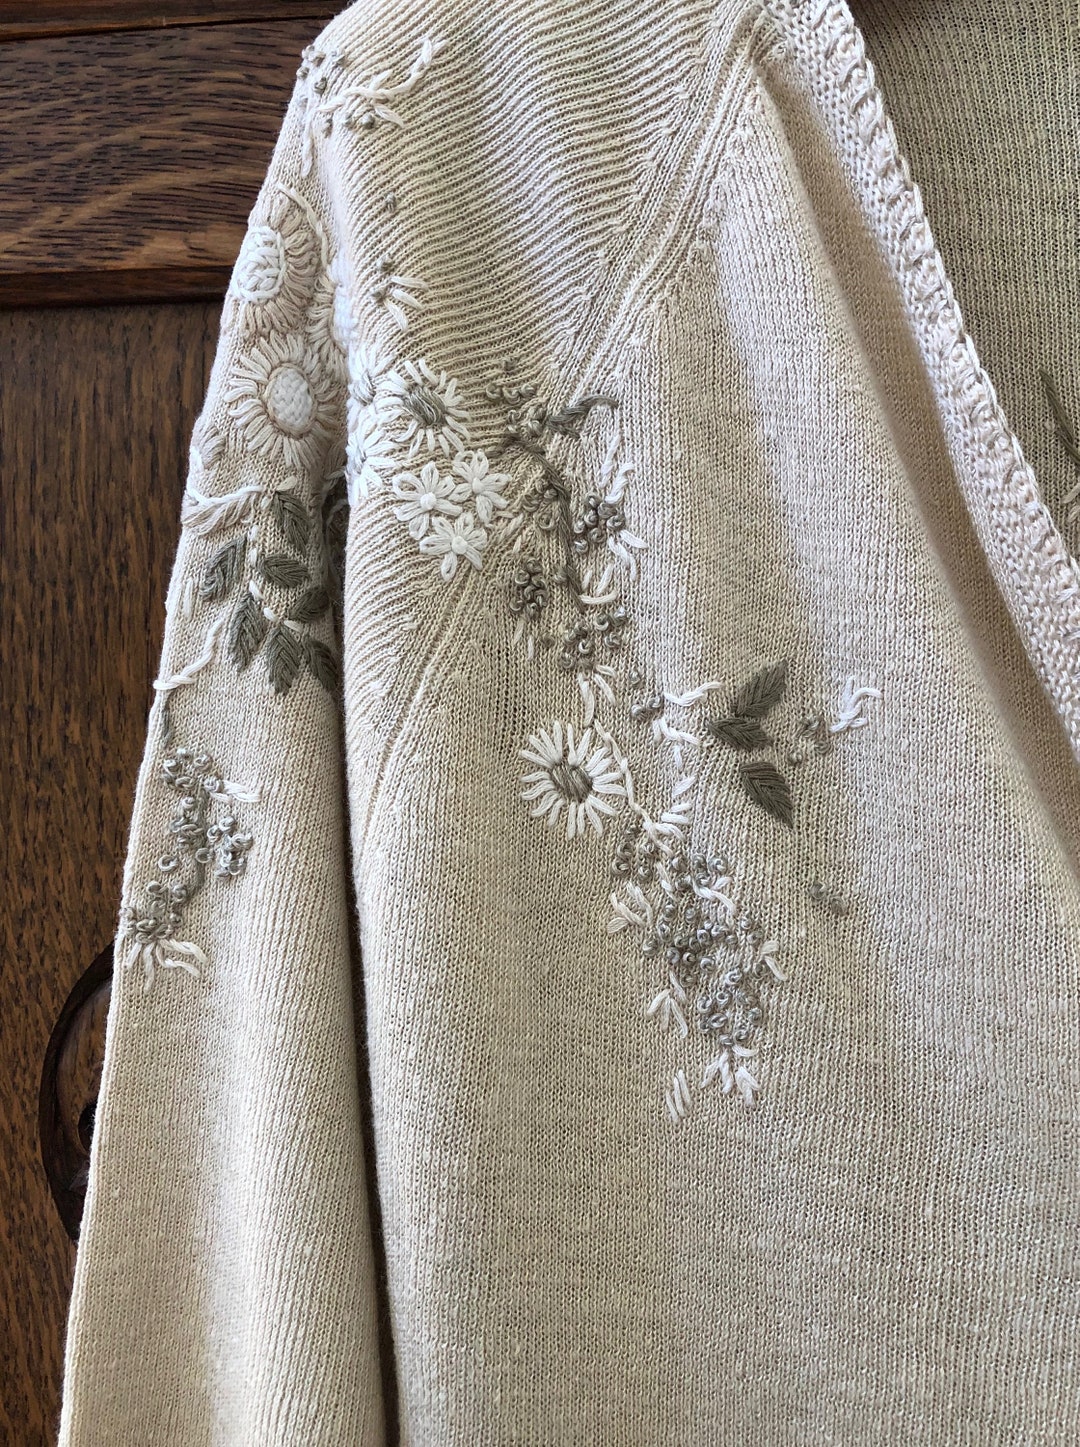 Vintage Sweater Beige Cardigan Style Floral Embroidery - Etsy